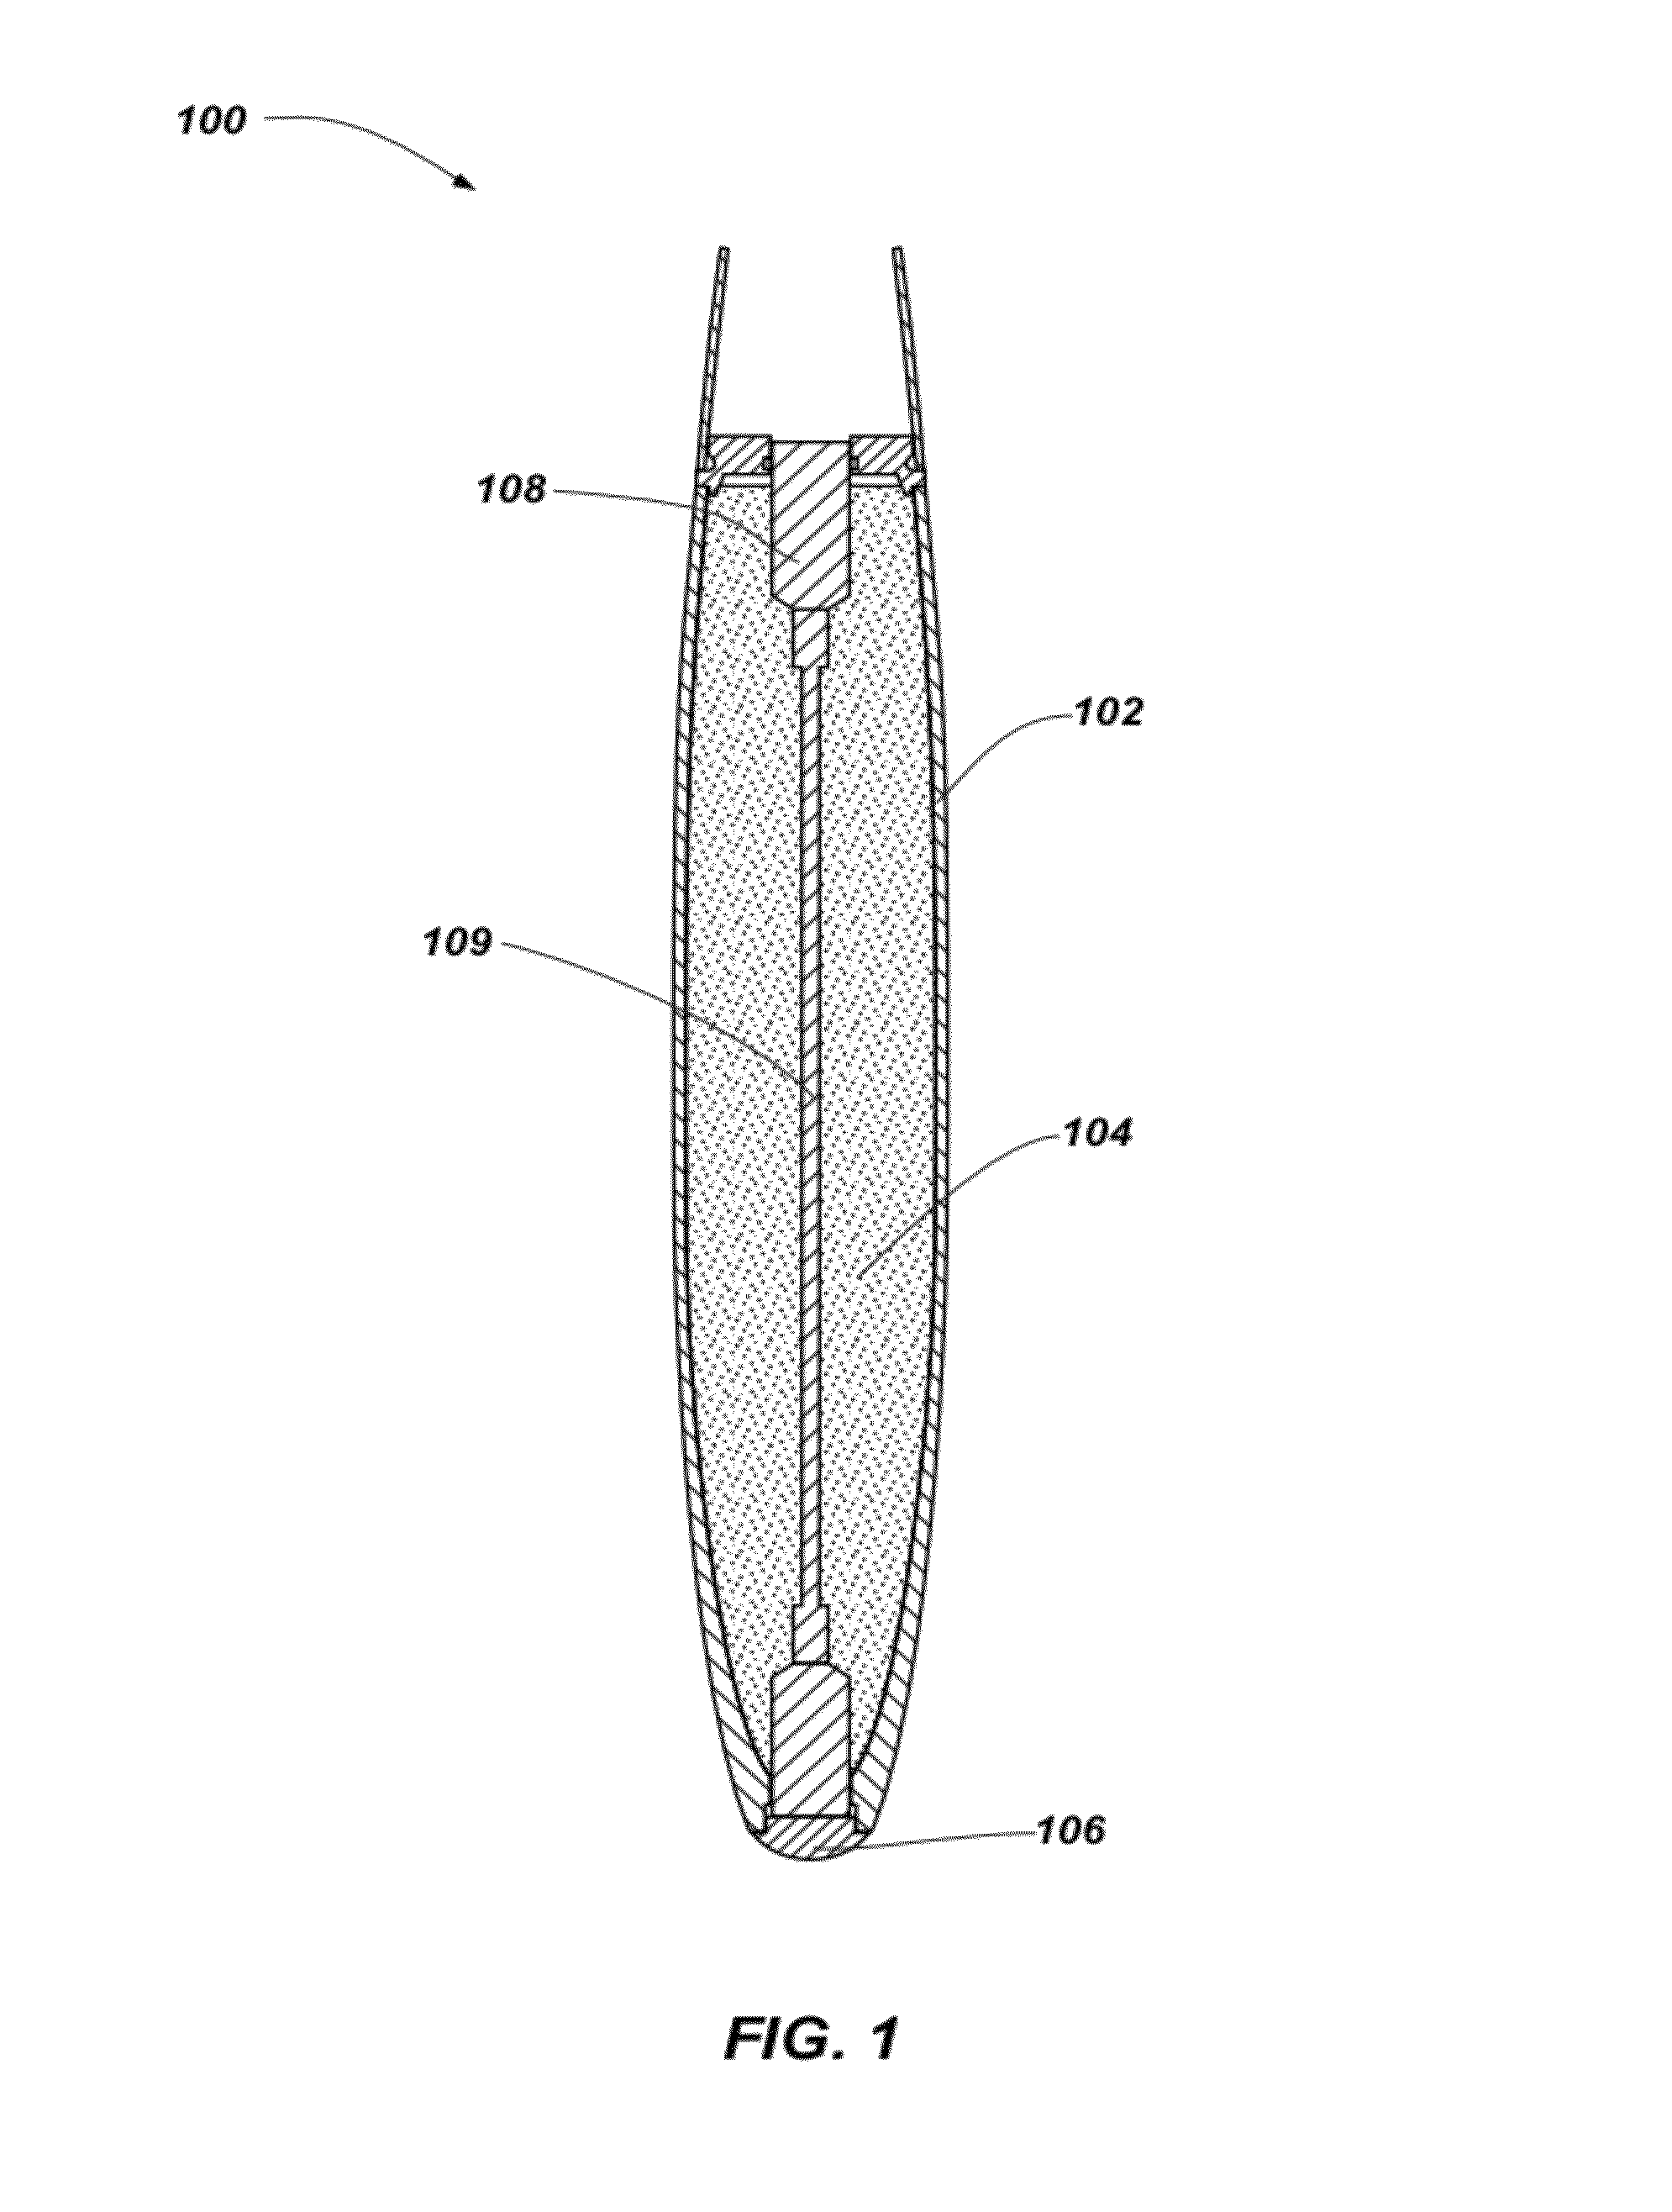 Initiation systems for explosive devices, scalable output explosive devices including initiation systems, and related methods